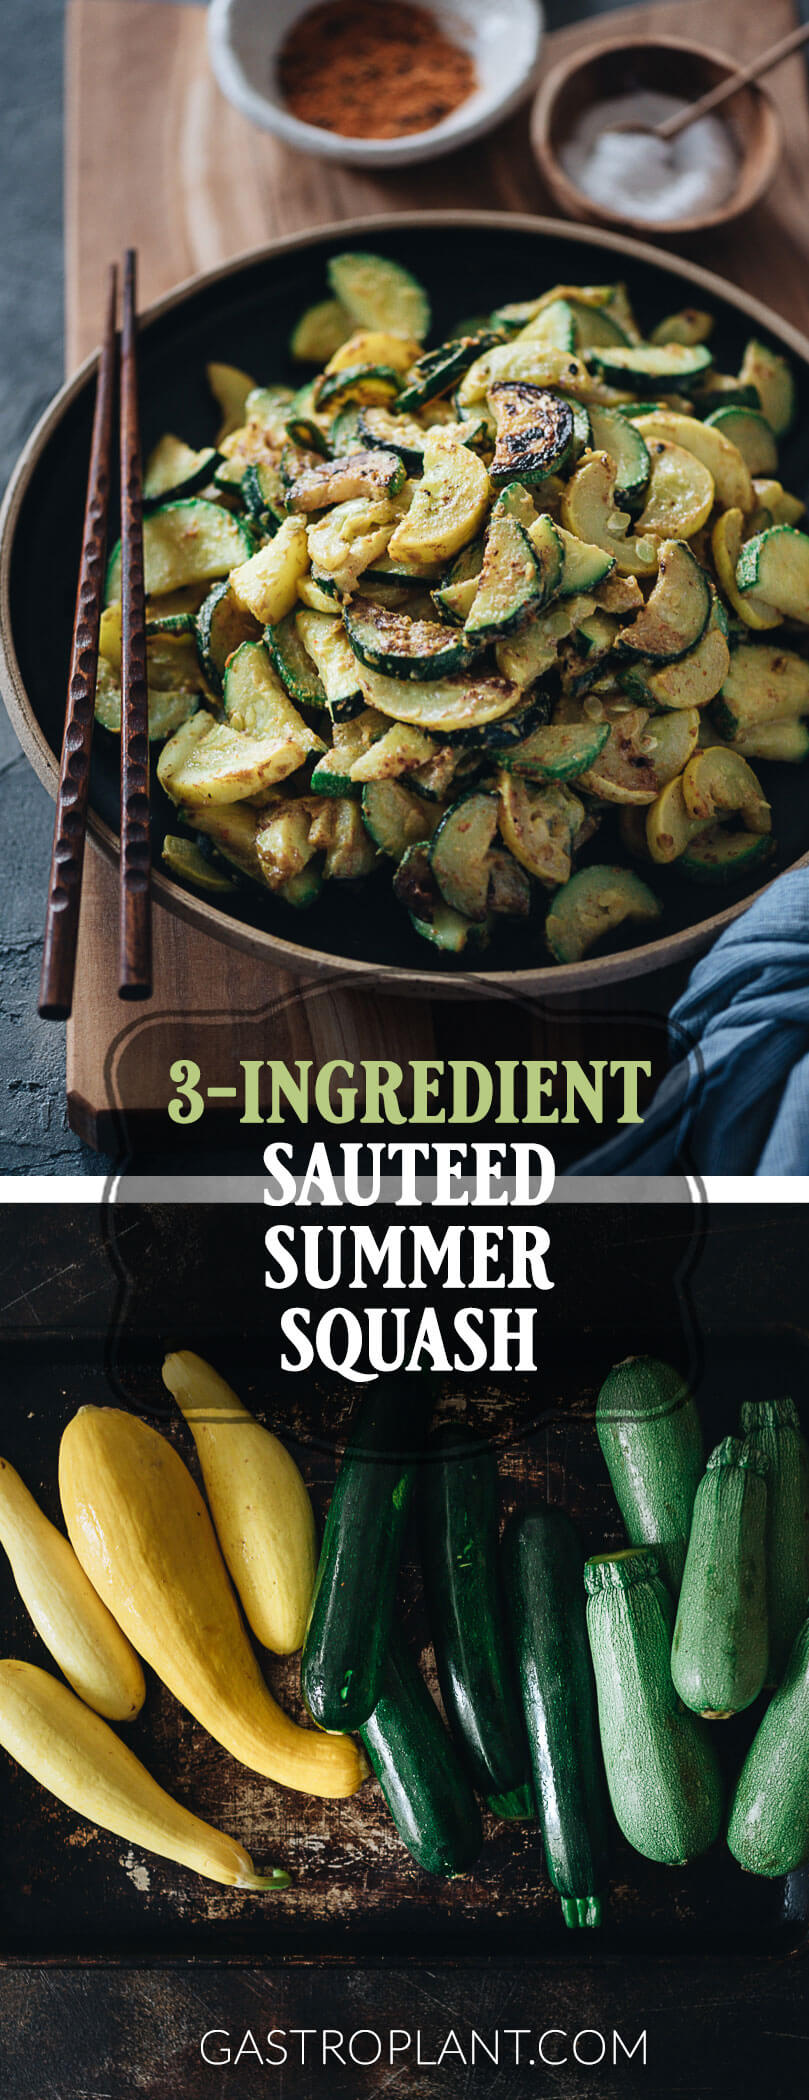 Easy healthy 3-ingredient sauteed summer squash as a side dish